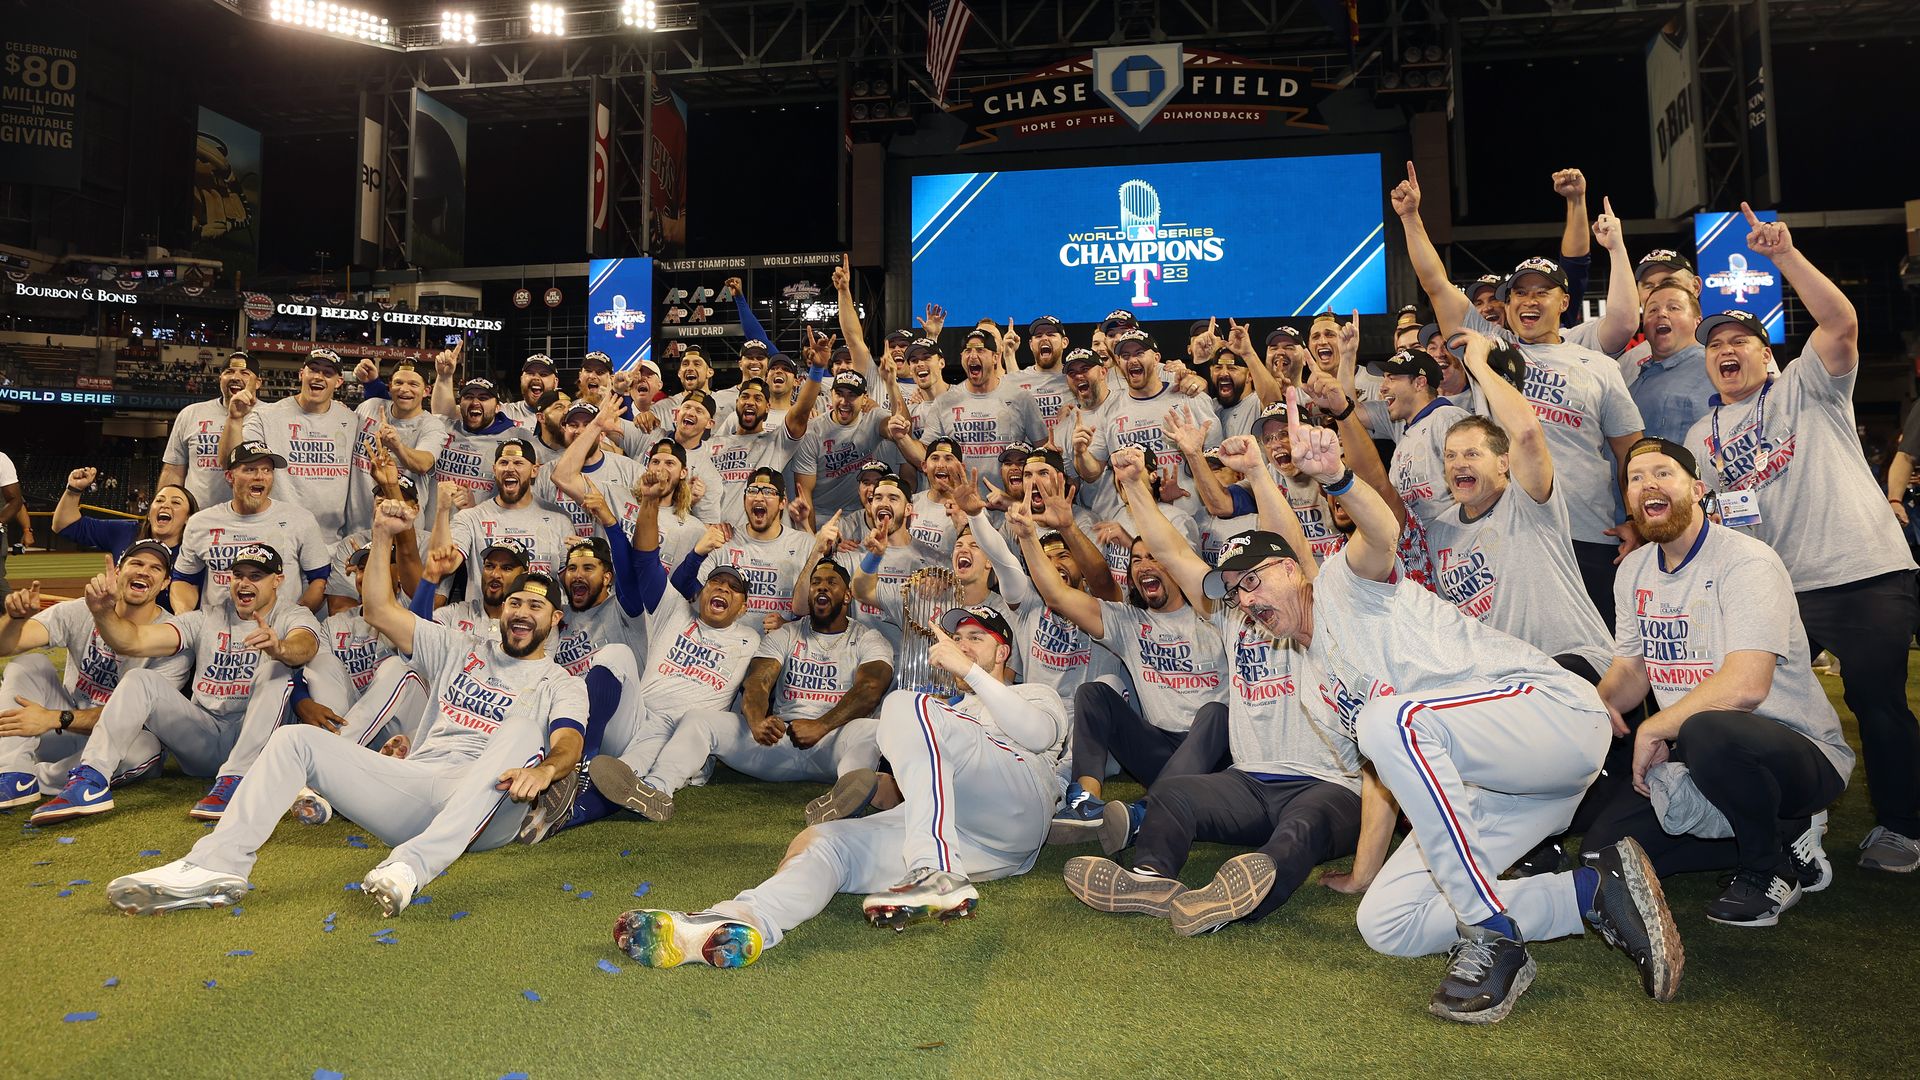 A team of baseball players in championship shirts after winning the World Series